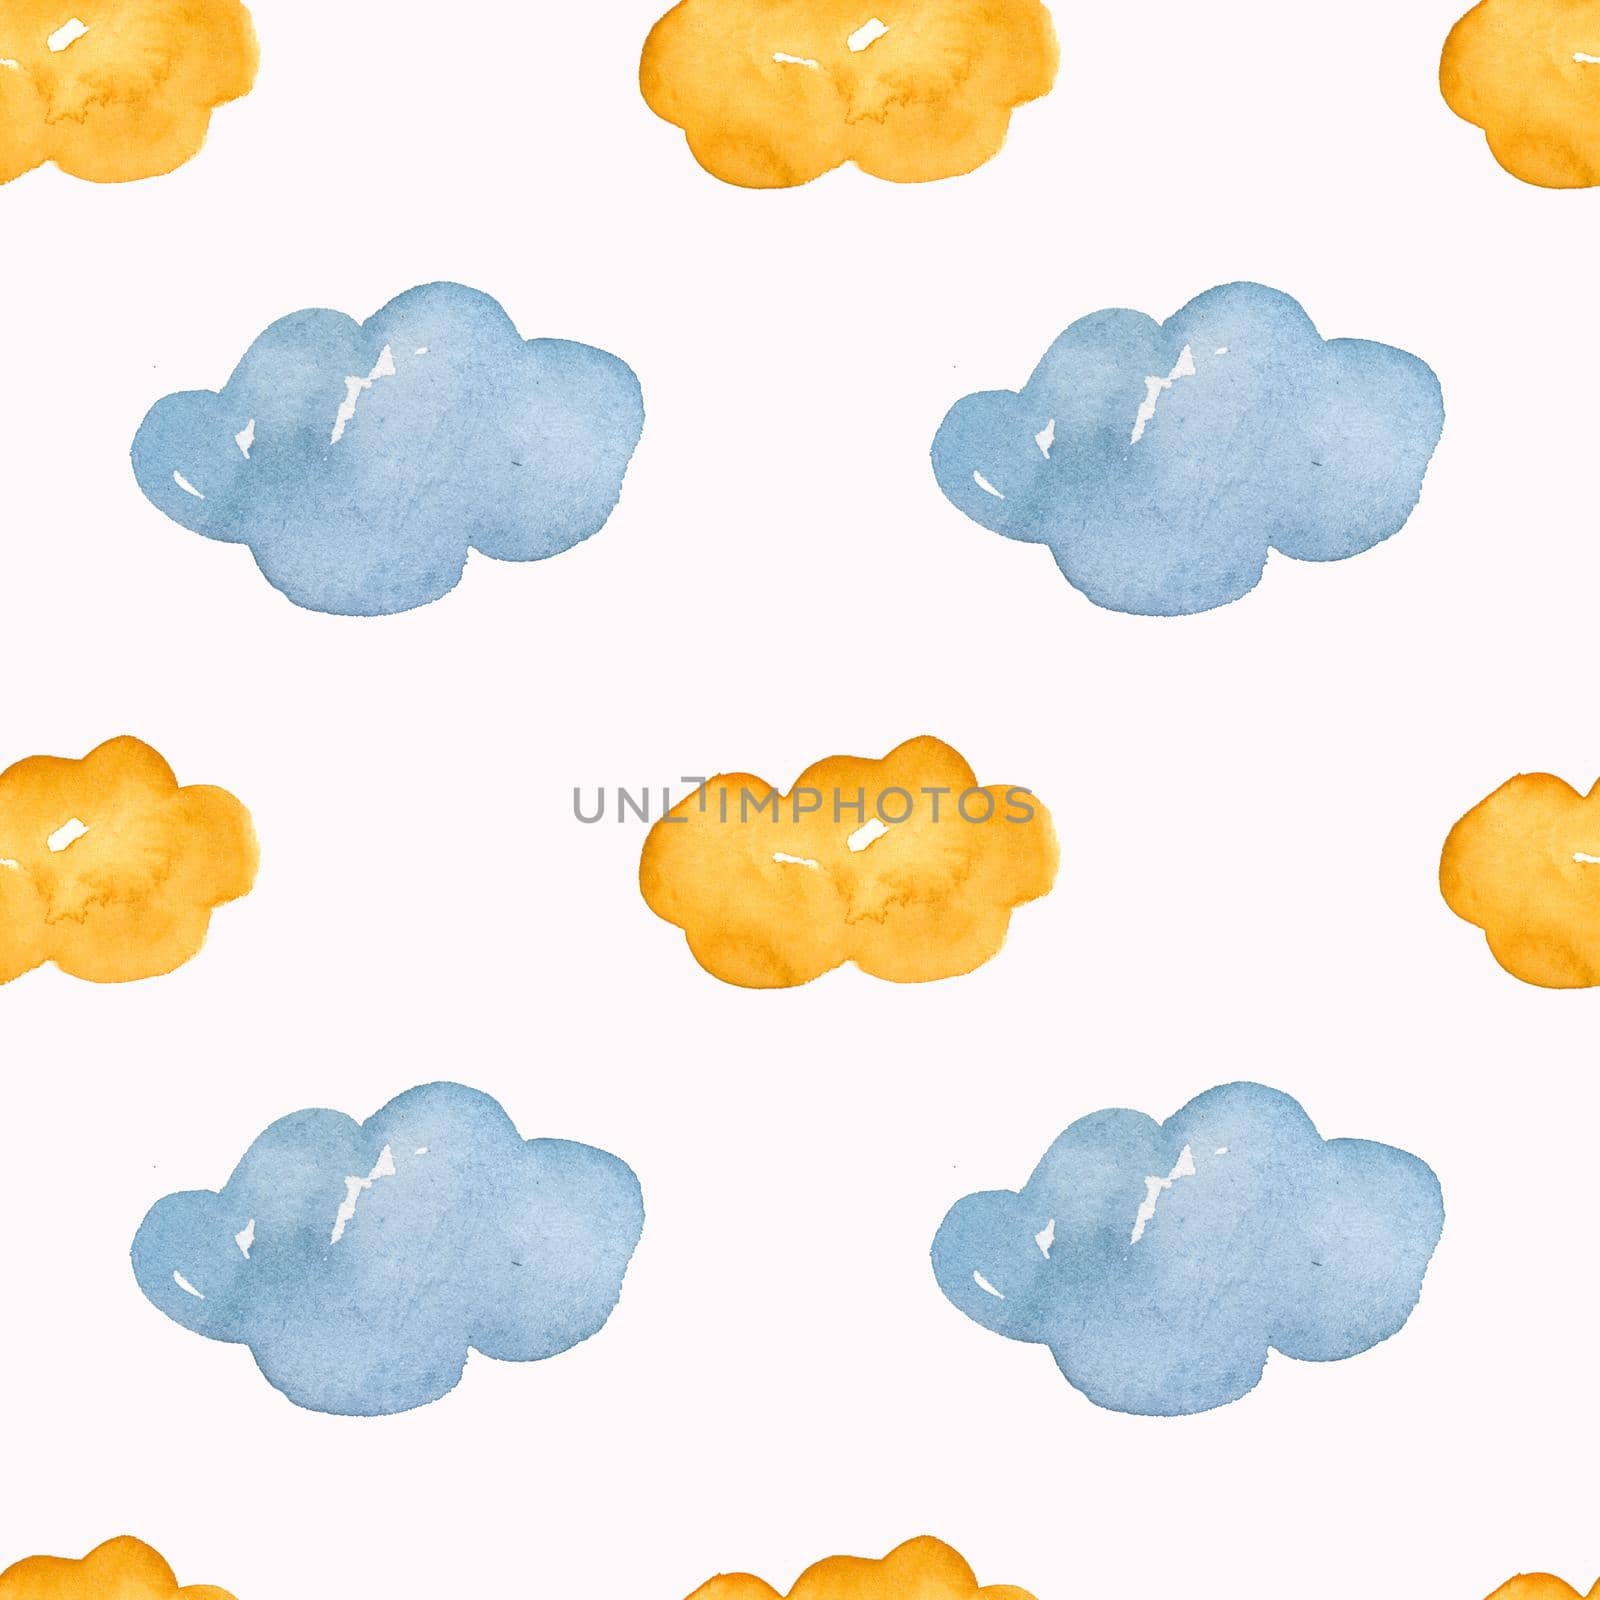 Seamless pattern for baby room clouds are blue and yellow. Bright positive watercolor drawing for fabric, wallpaper, packaging